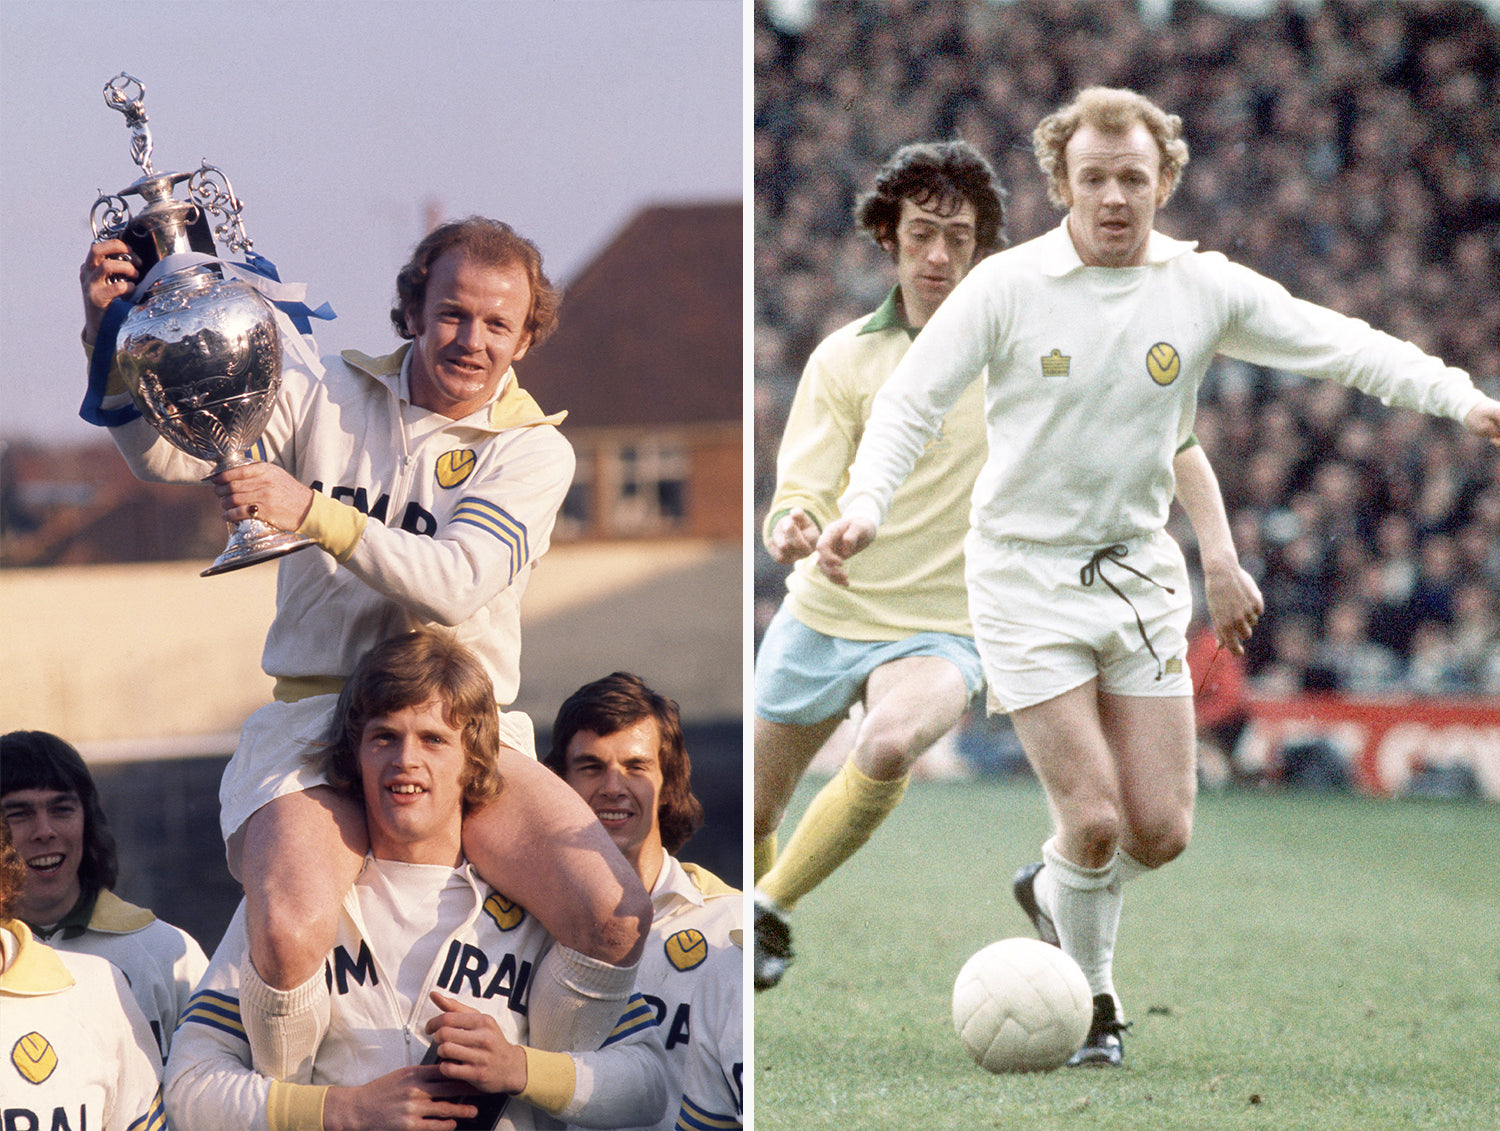 Leeds United's Billy Bremner lifting the League trophy after becoming Champions in 1974